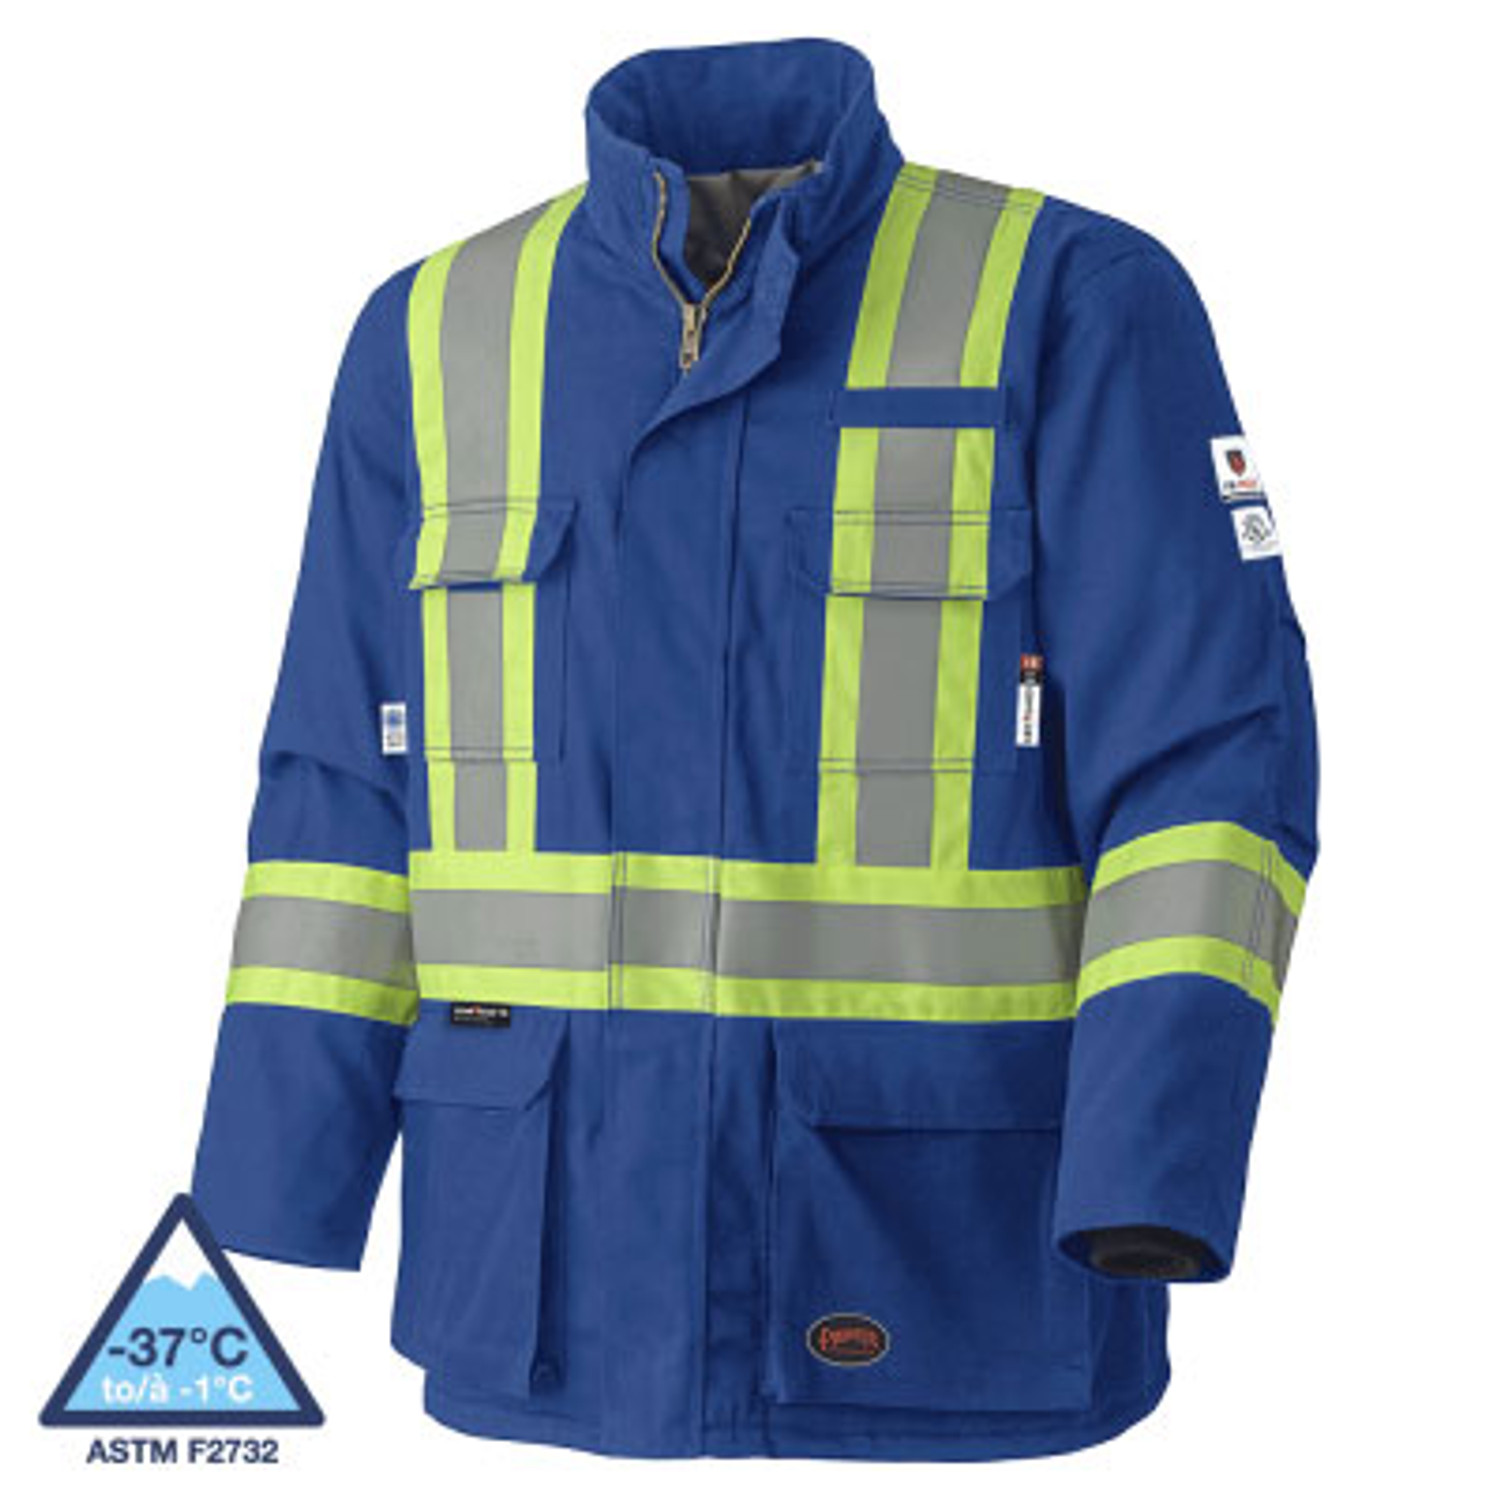 https://cdn11.bigcommerce.com/s-10f42/images/stencil/1500x1500/products/437/6216/pioneer-flame-resistant-qulited-jacket-safetywear.ca__14672.1631129241.jpg?c=2